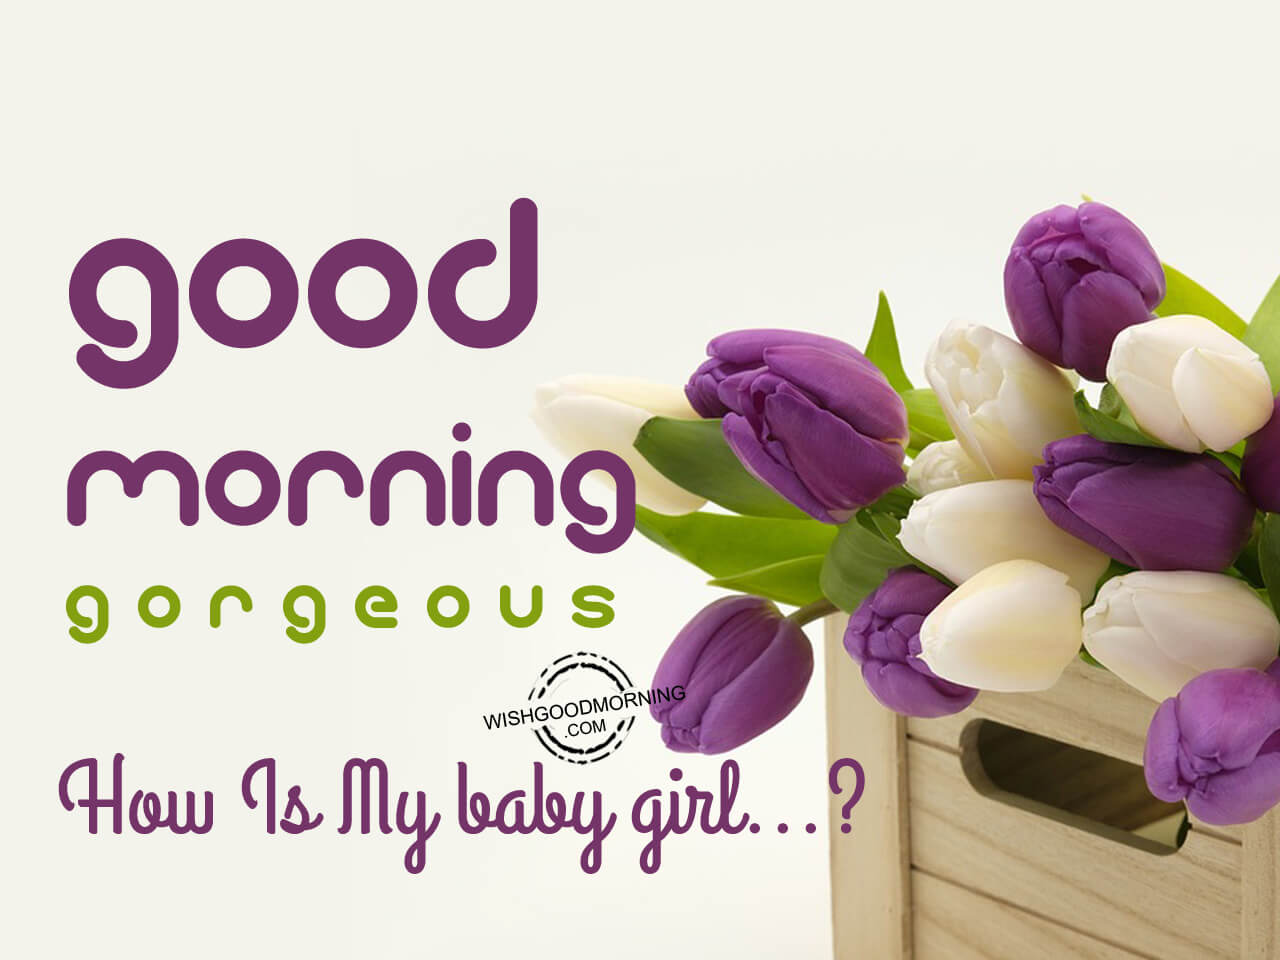 Good Morning Gorgeous - Good Morning Pictures – WishGoodMorning.com